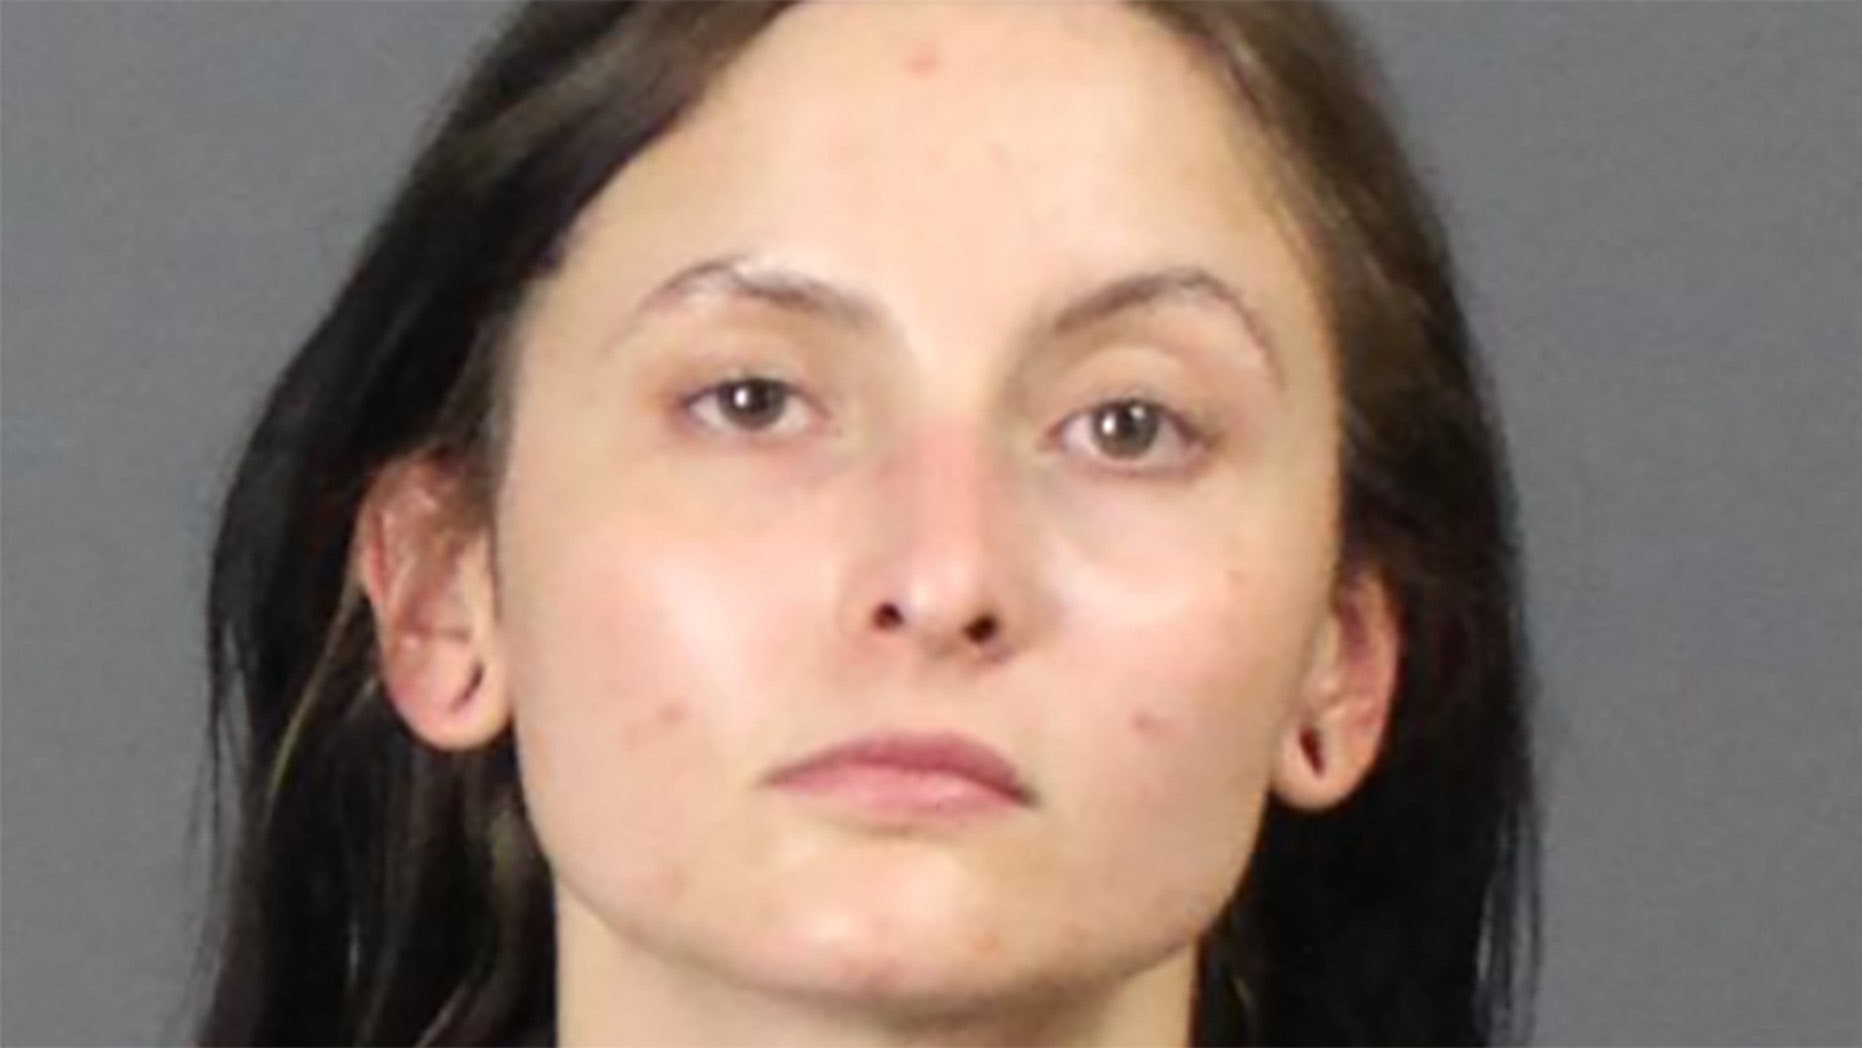 The Colorado woman who shot an alleged intruder is now facing charges